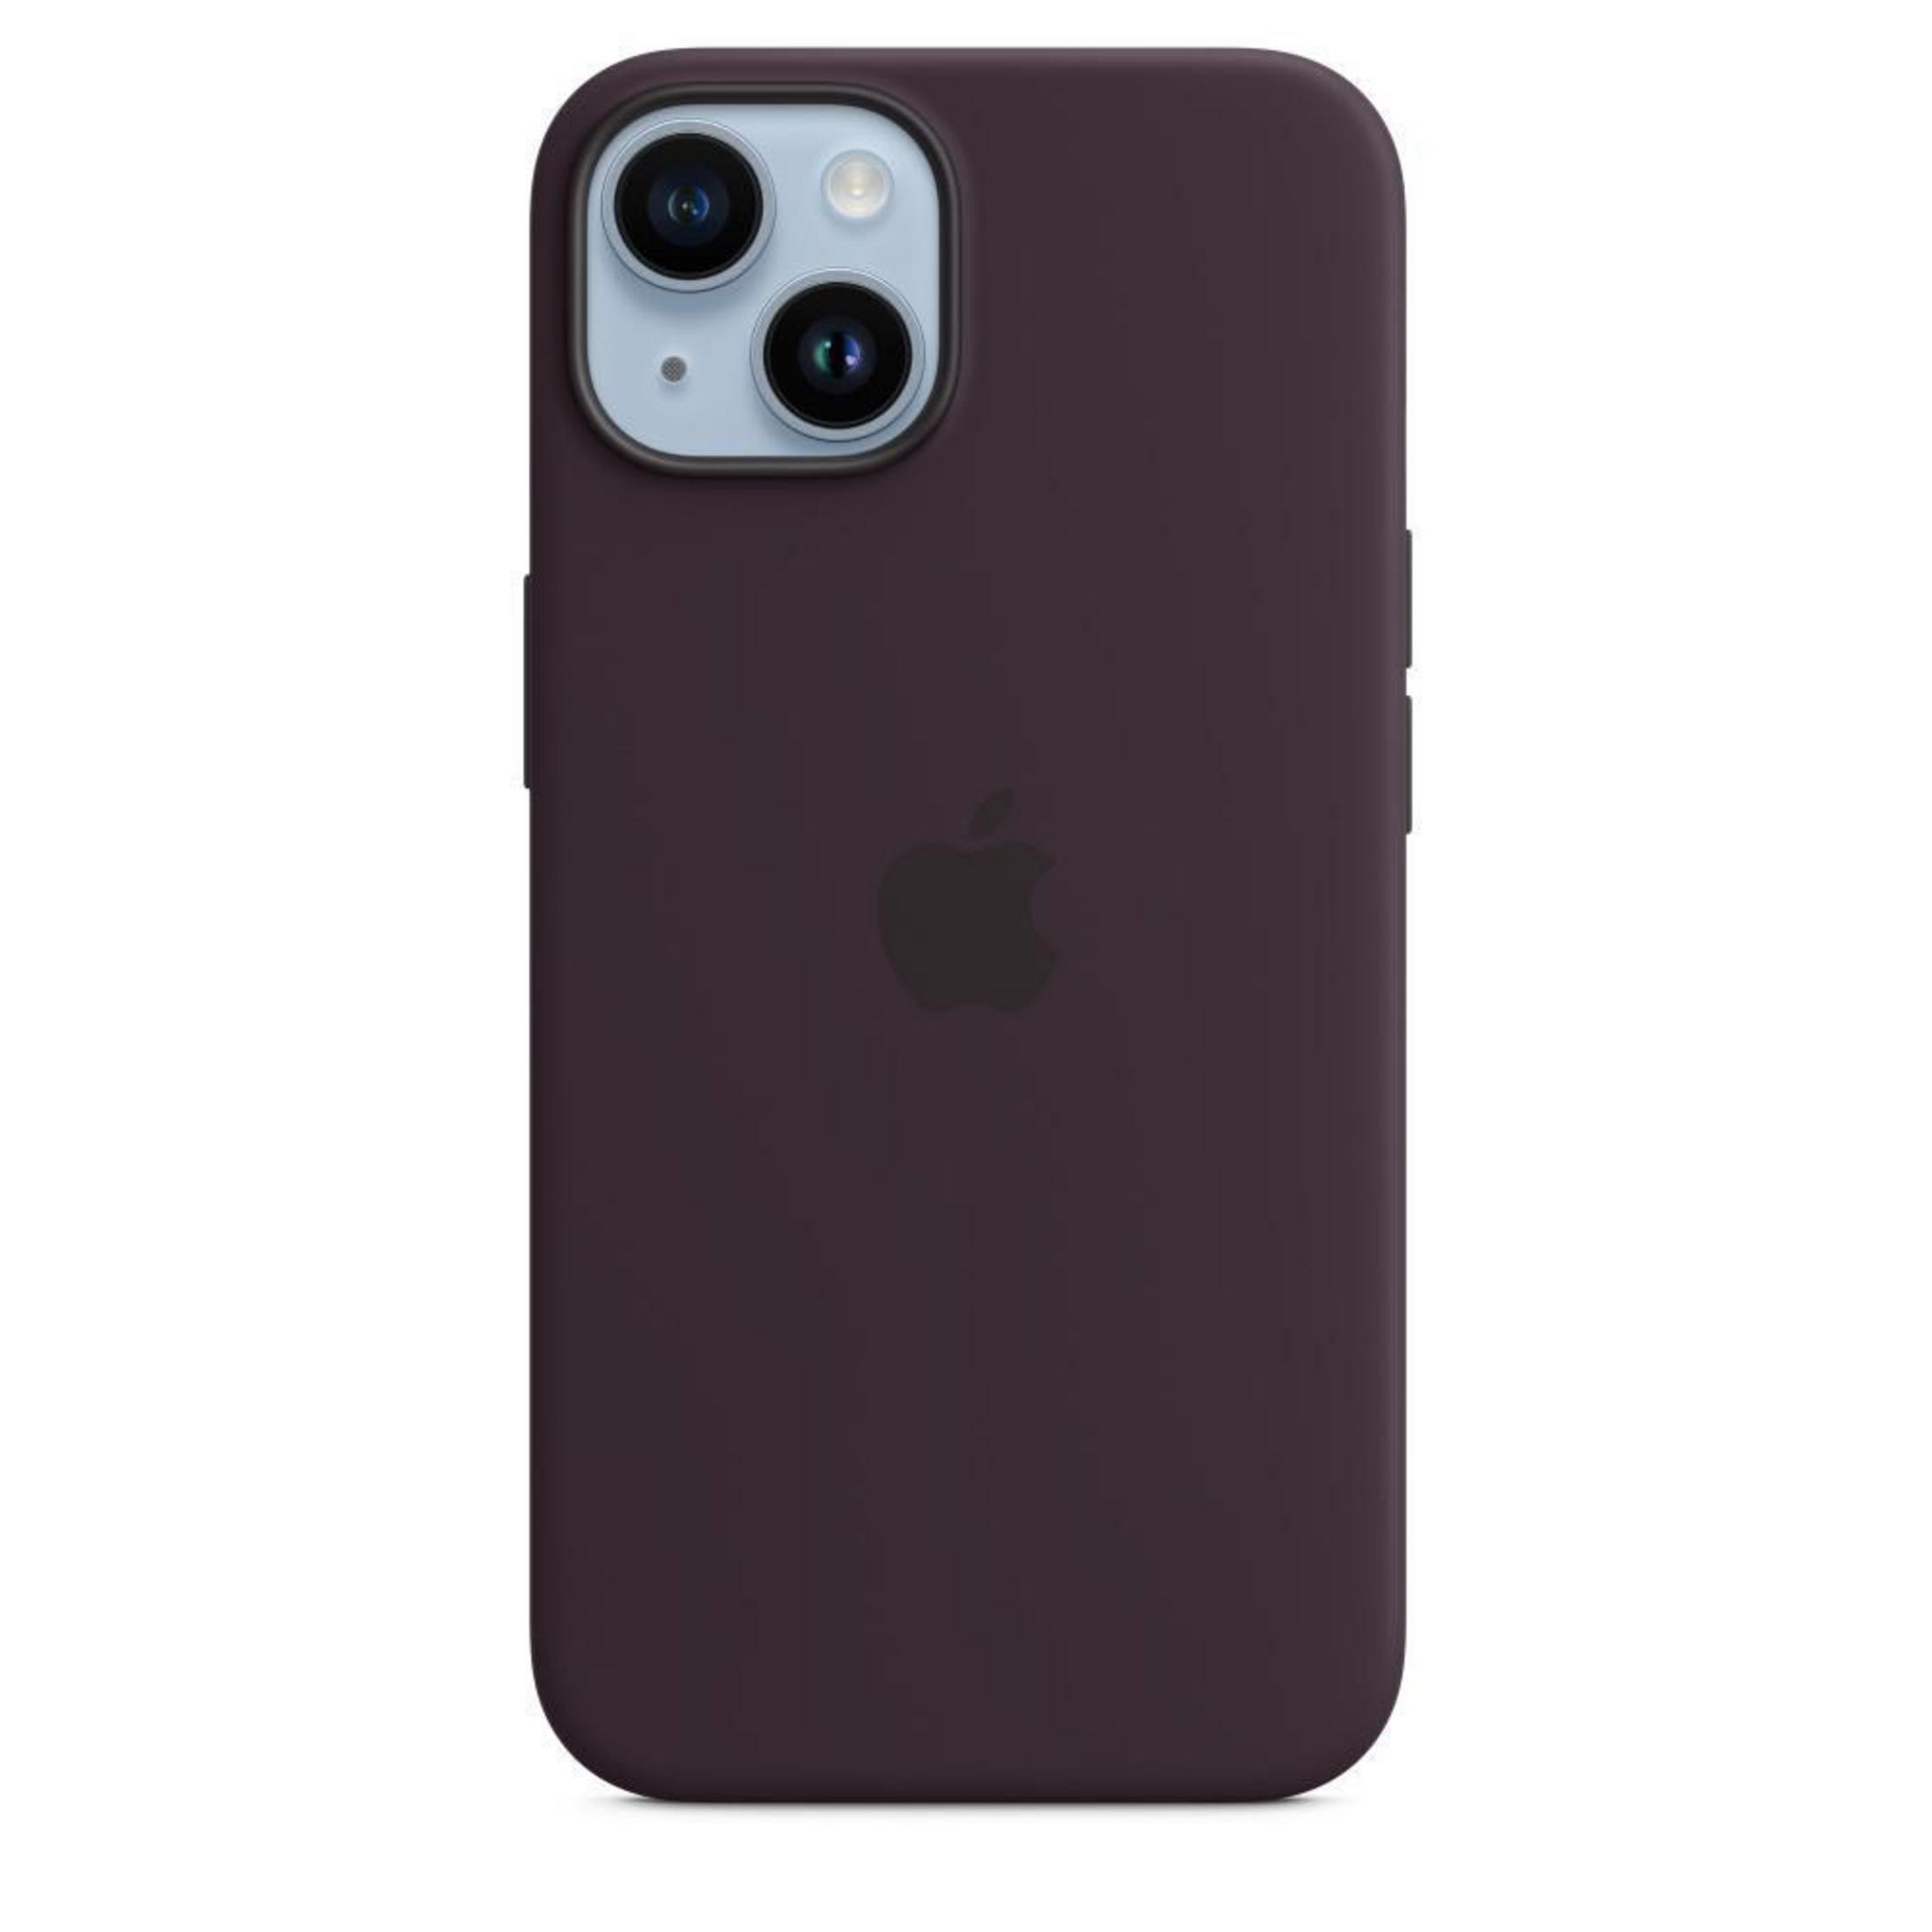 Apple, MS iPhone CASE IP 14, ELDERBERRY, Backcover, Holunder 14 APPLE MPT03ZM/A - SIL